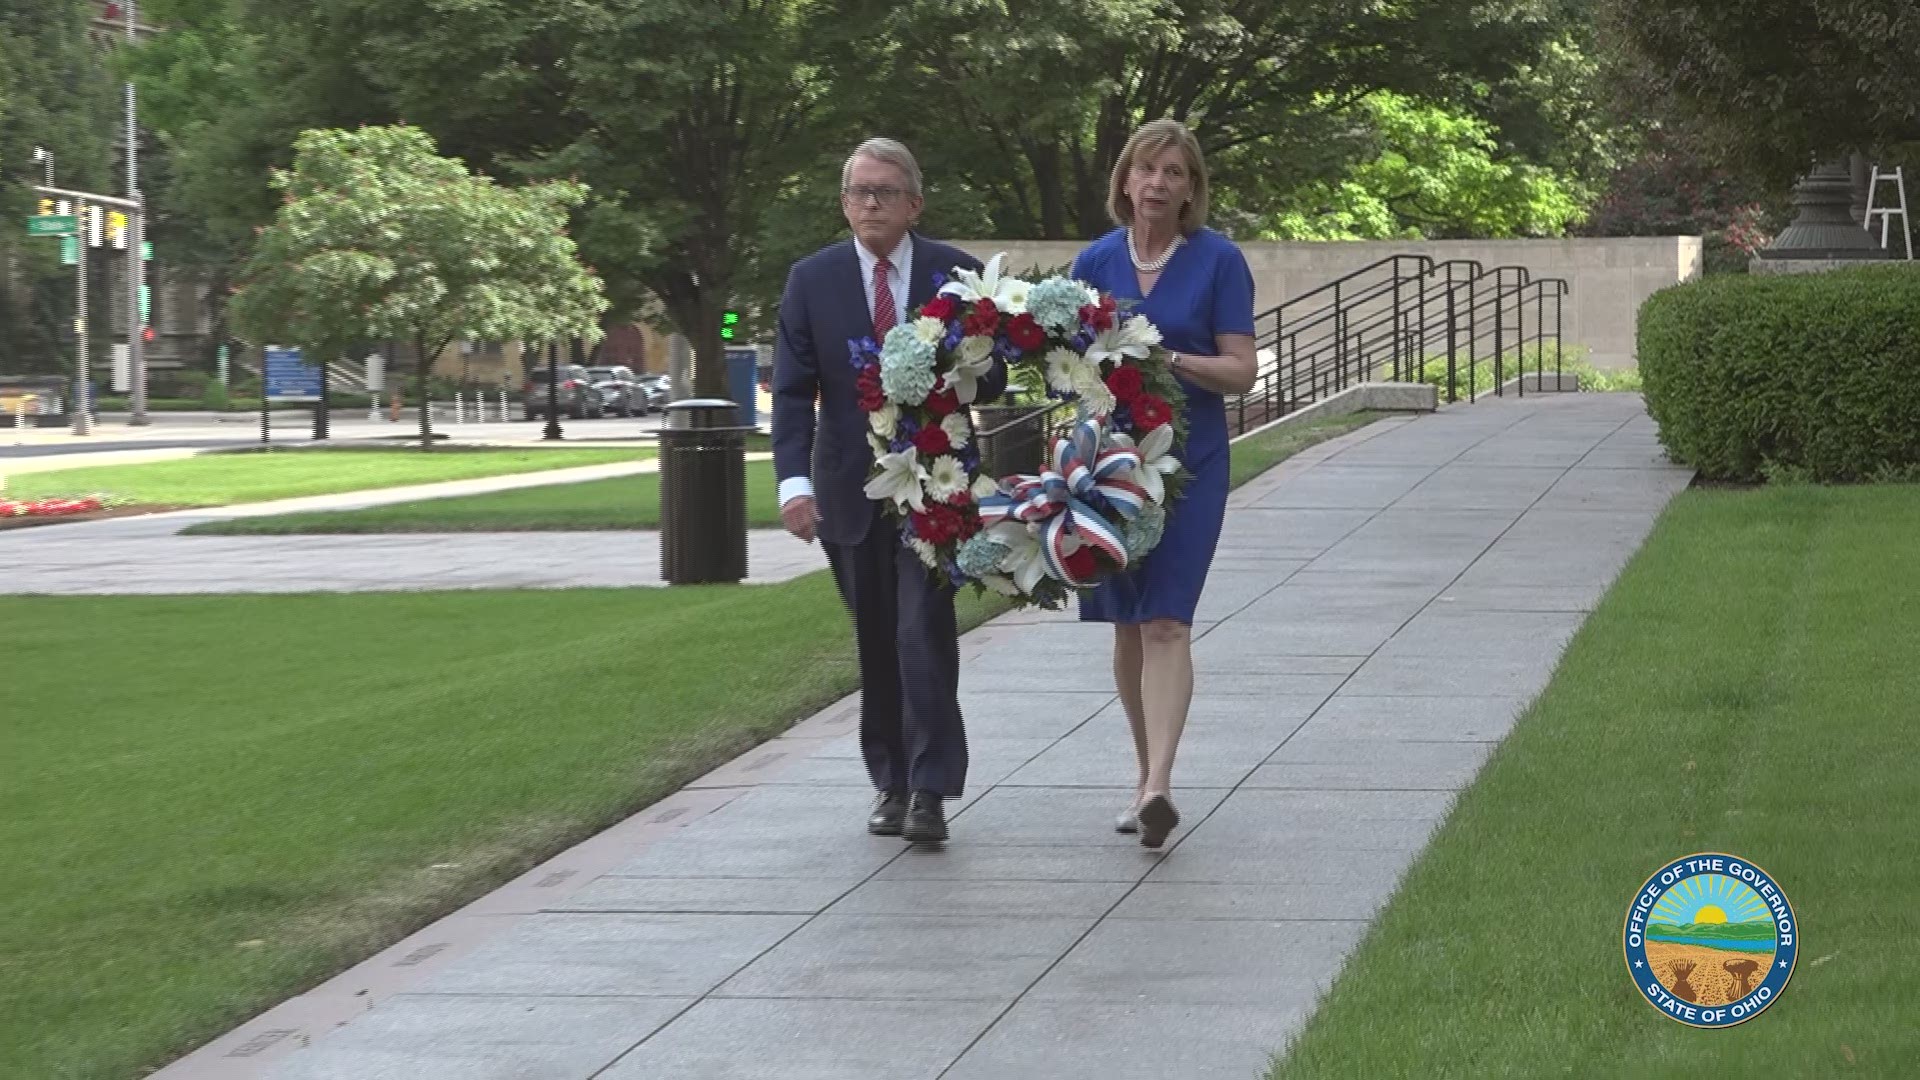 The ceremony was held in honor of the Ohio service members who sacrificed their lives to serve and protect our country.